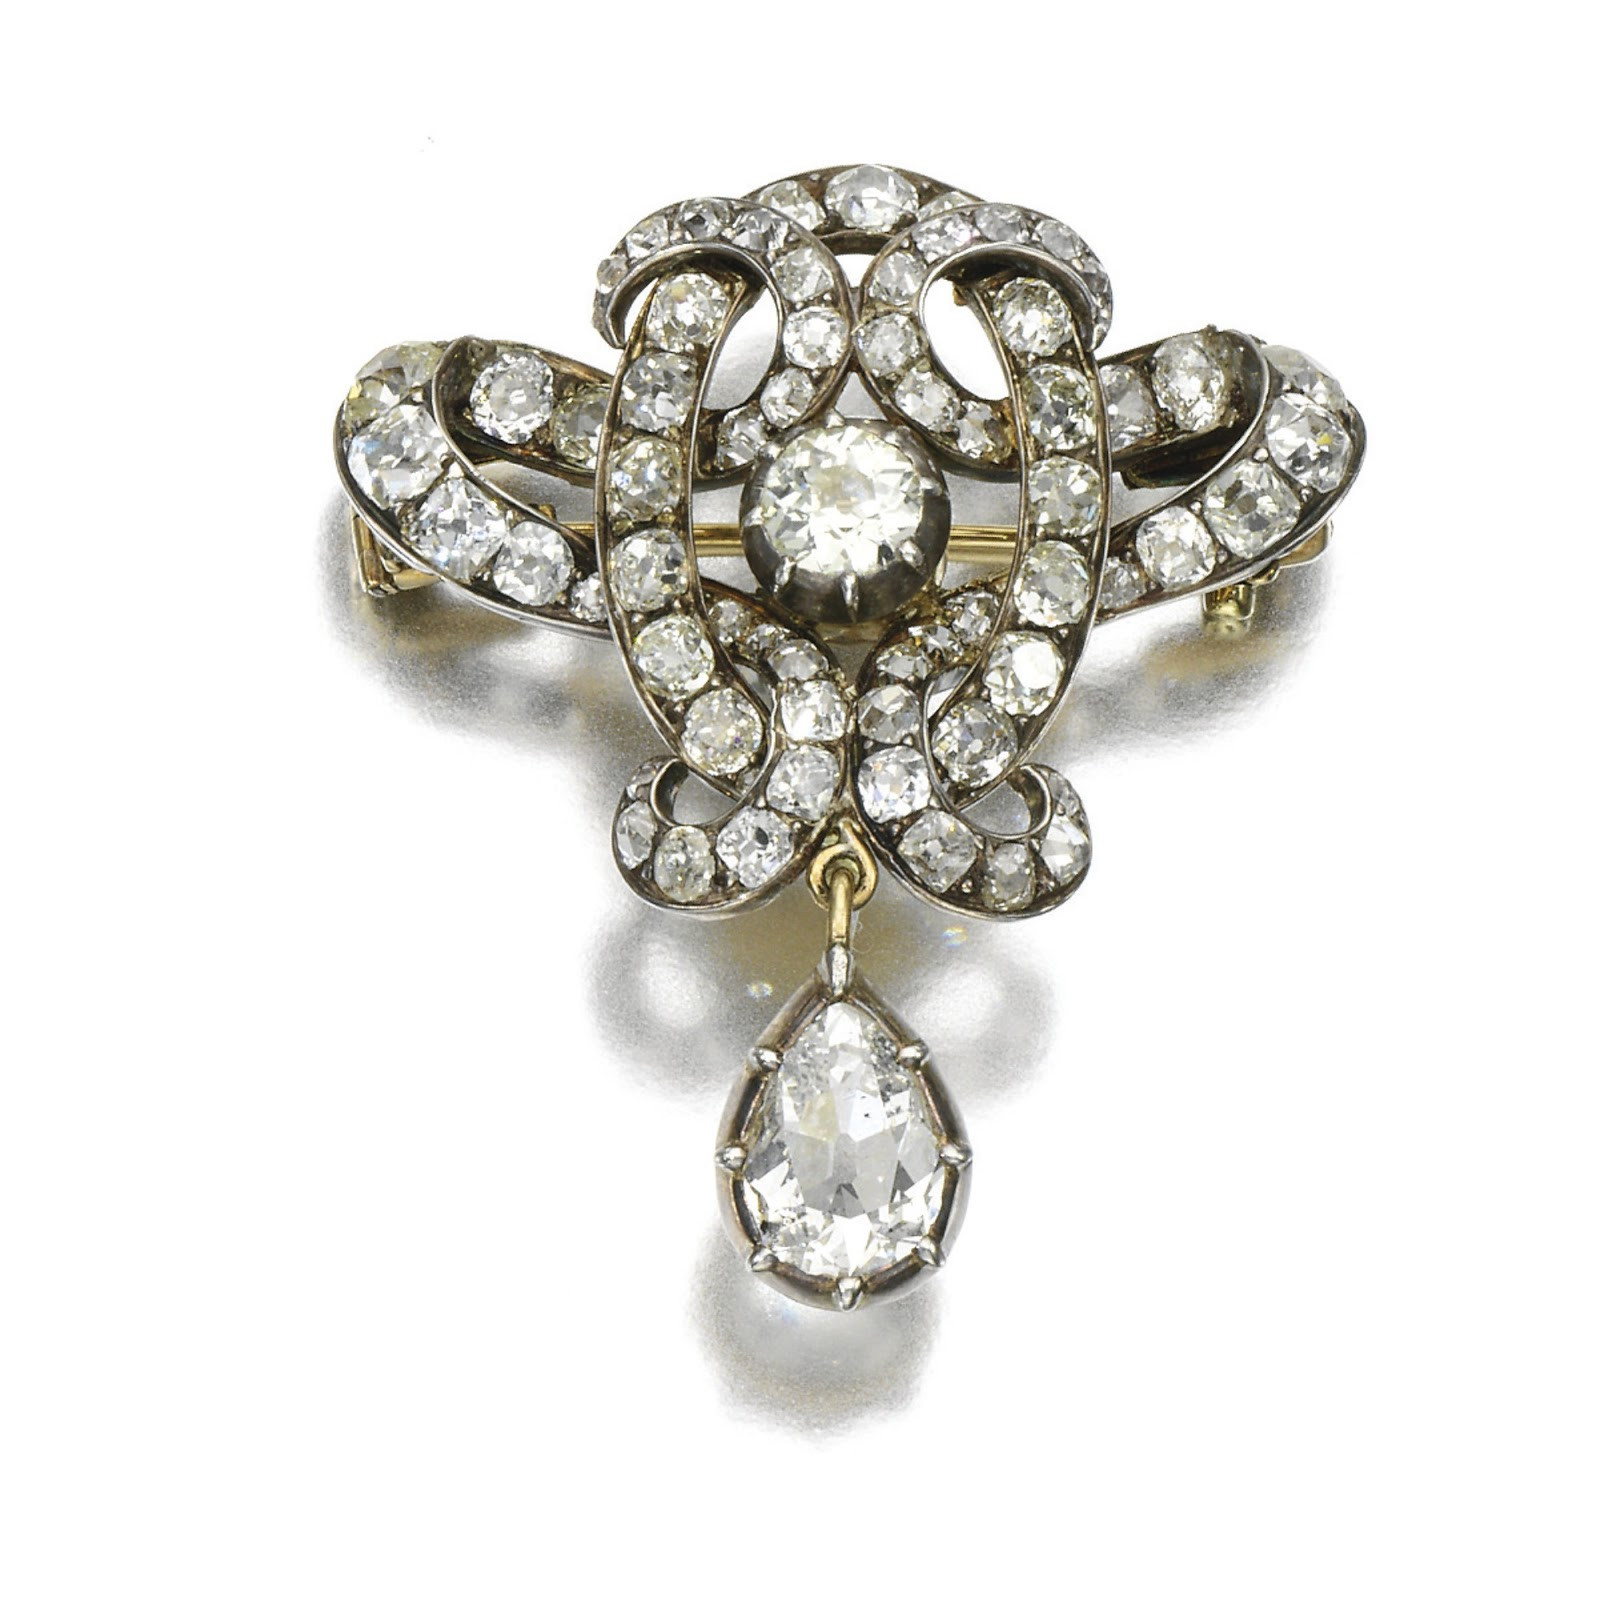 Diamond Brooches
 Marie Poutine s Jewels & Royals Amazing Diamond Brooches